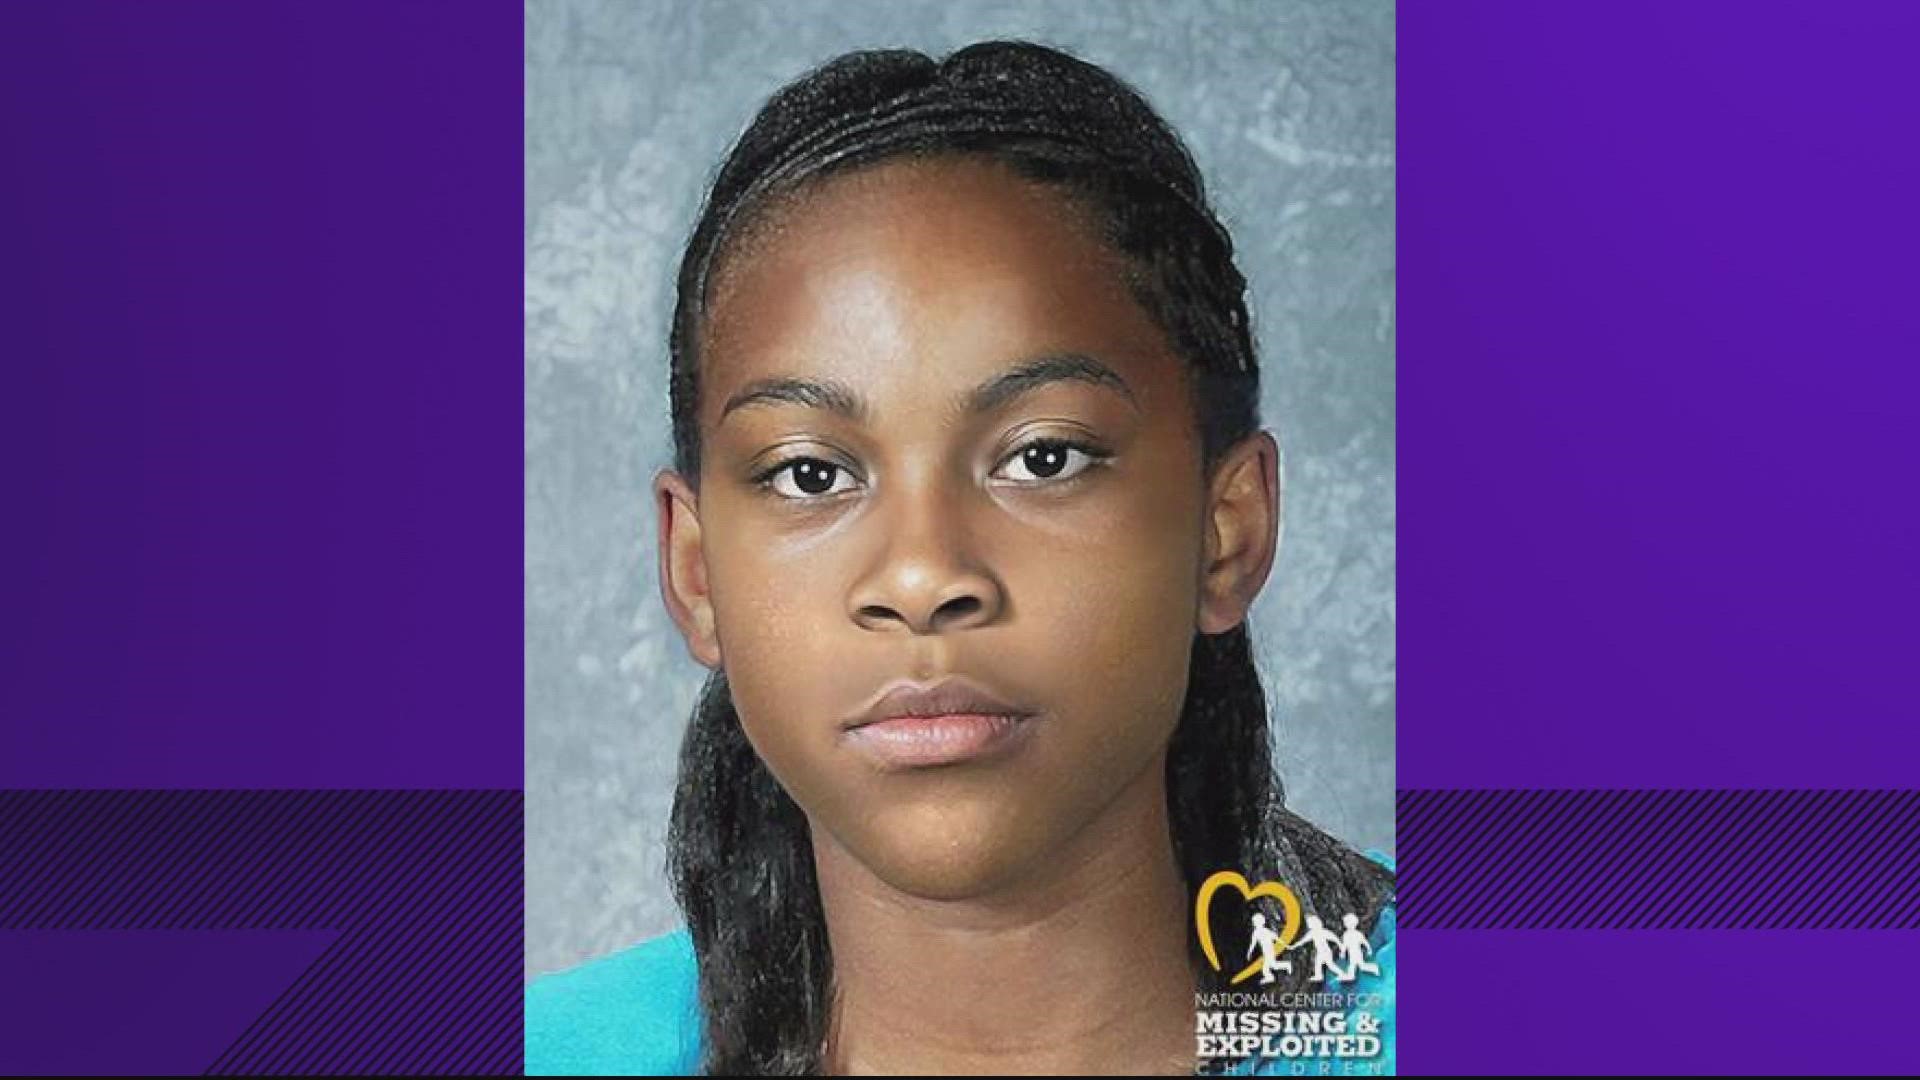 Relisha Rudd went missing on March 1, 2014. Community members in D.C. continue to search for her.